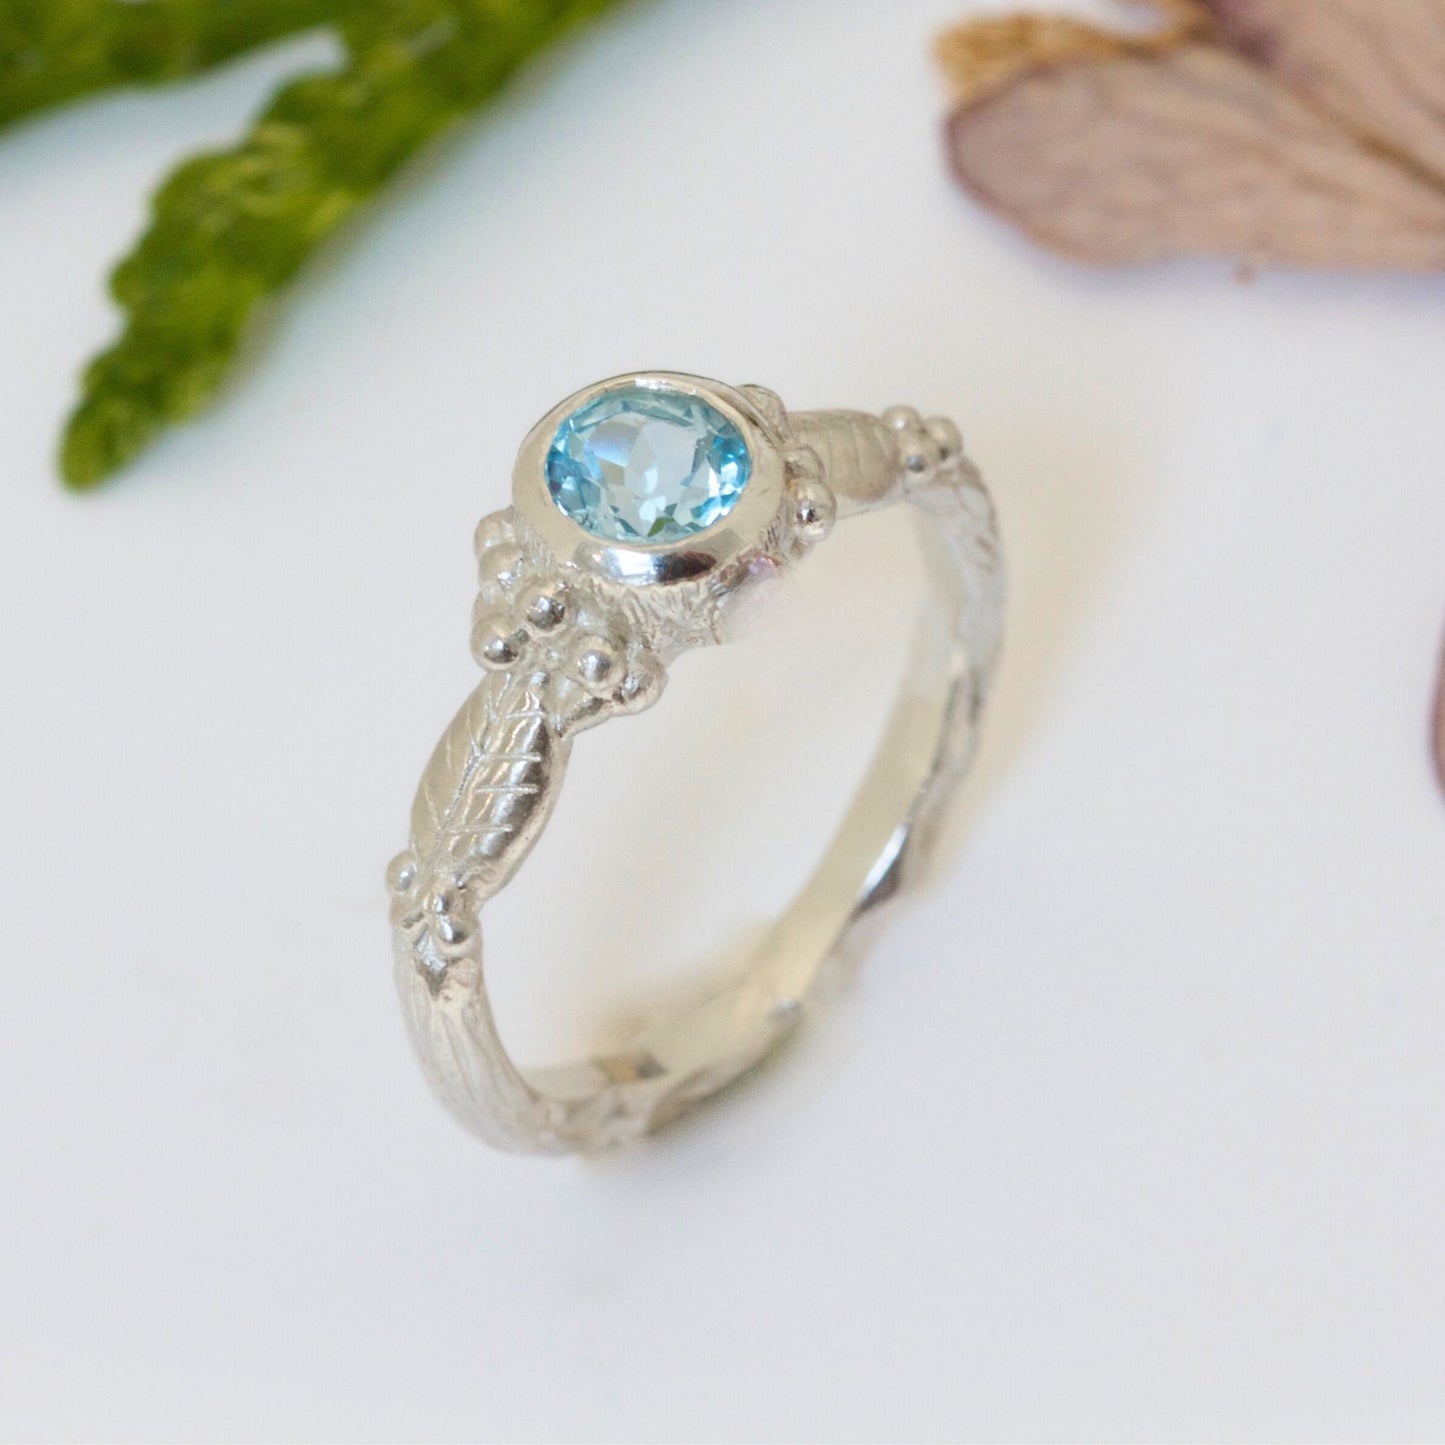 Jewelled Silver Twig Rings, Silver and Gemstone Leaf Ring, Alternative Engagement Ring